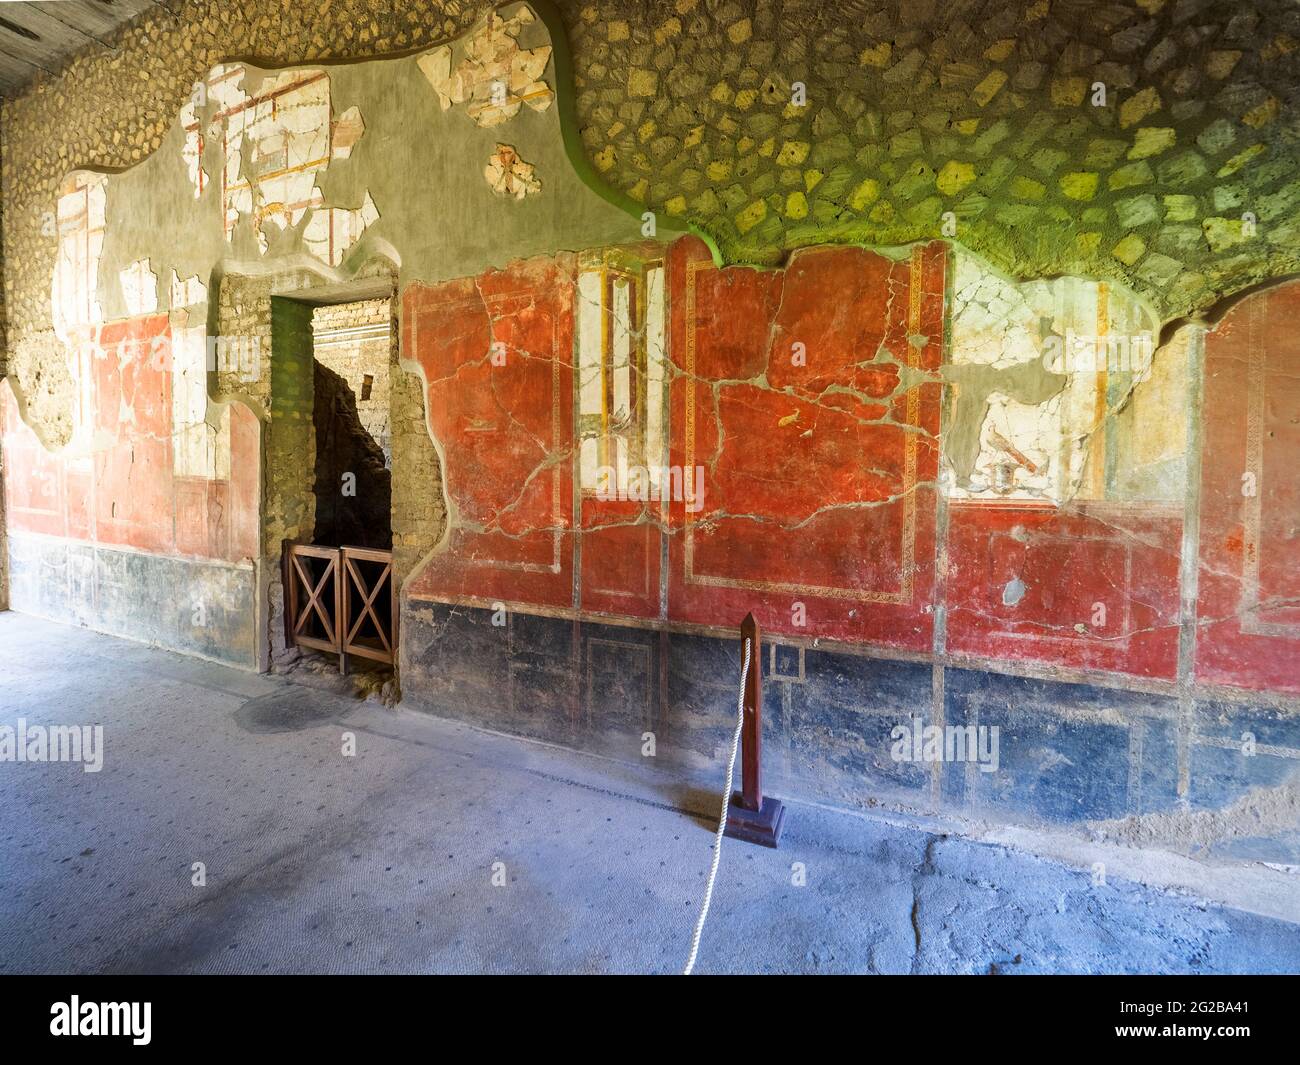 Fresco decorated wall - Oplontis known as Villa Poppaea in Torre Annunziata - Naples, Italy Stock Photo